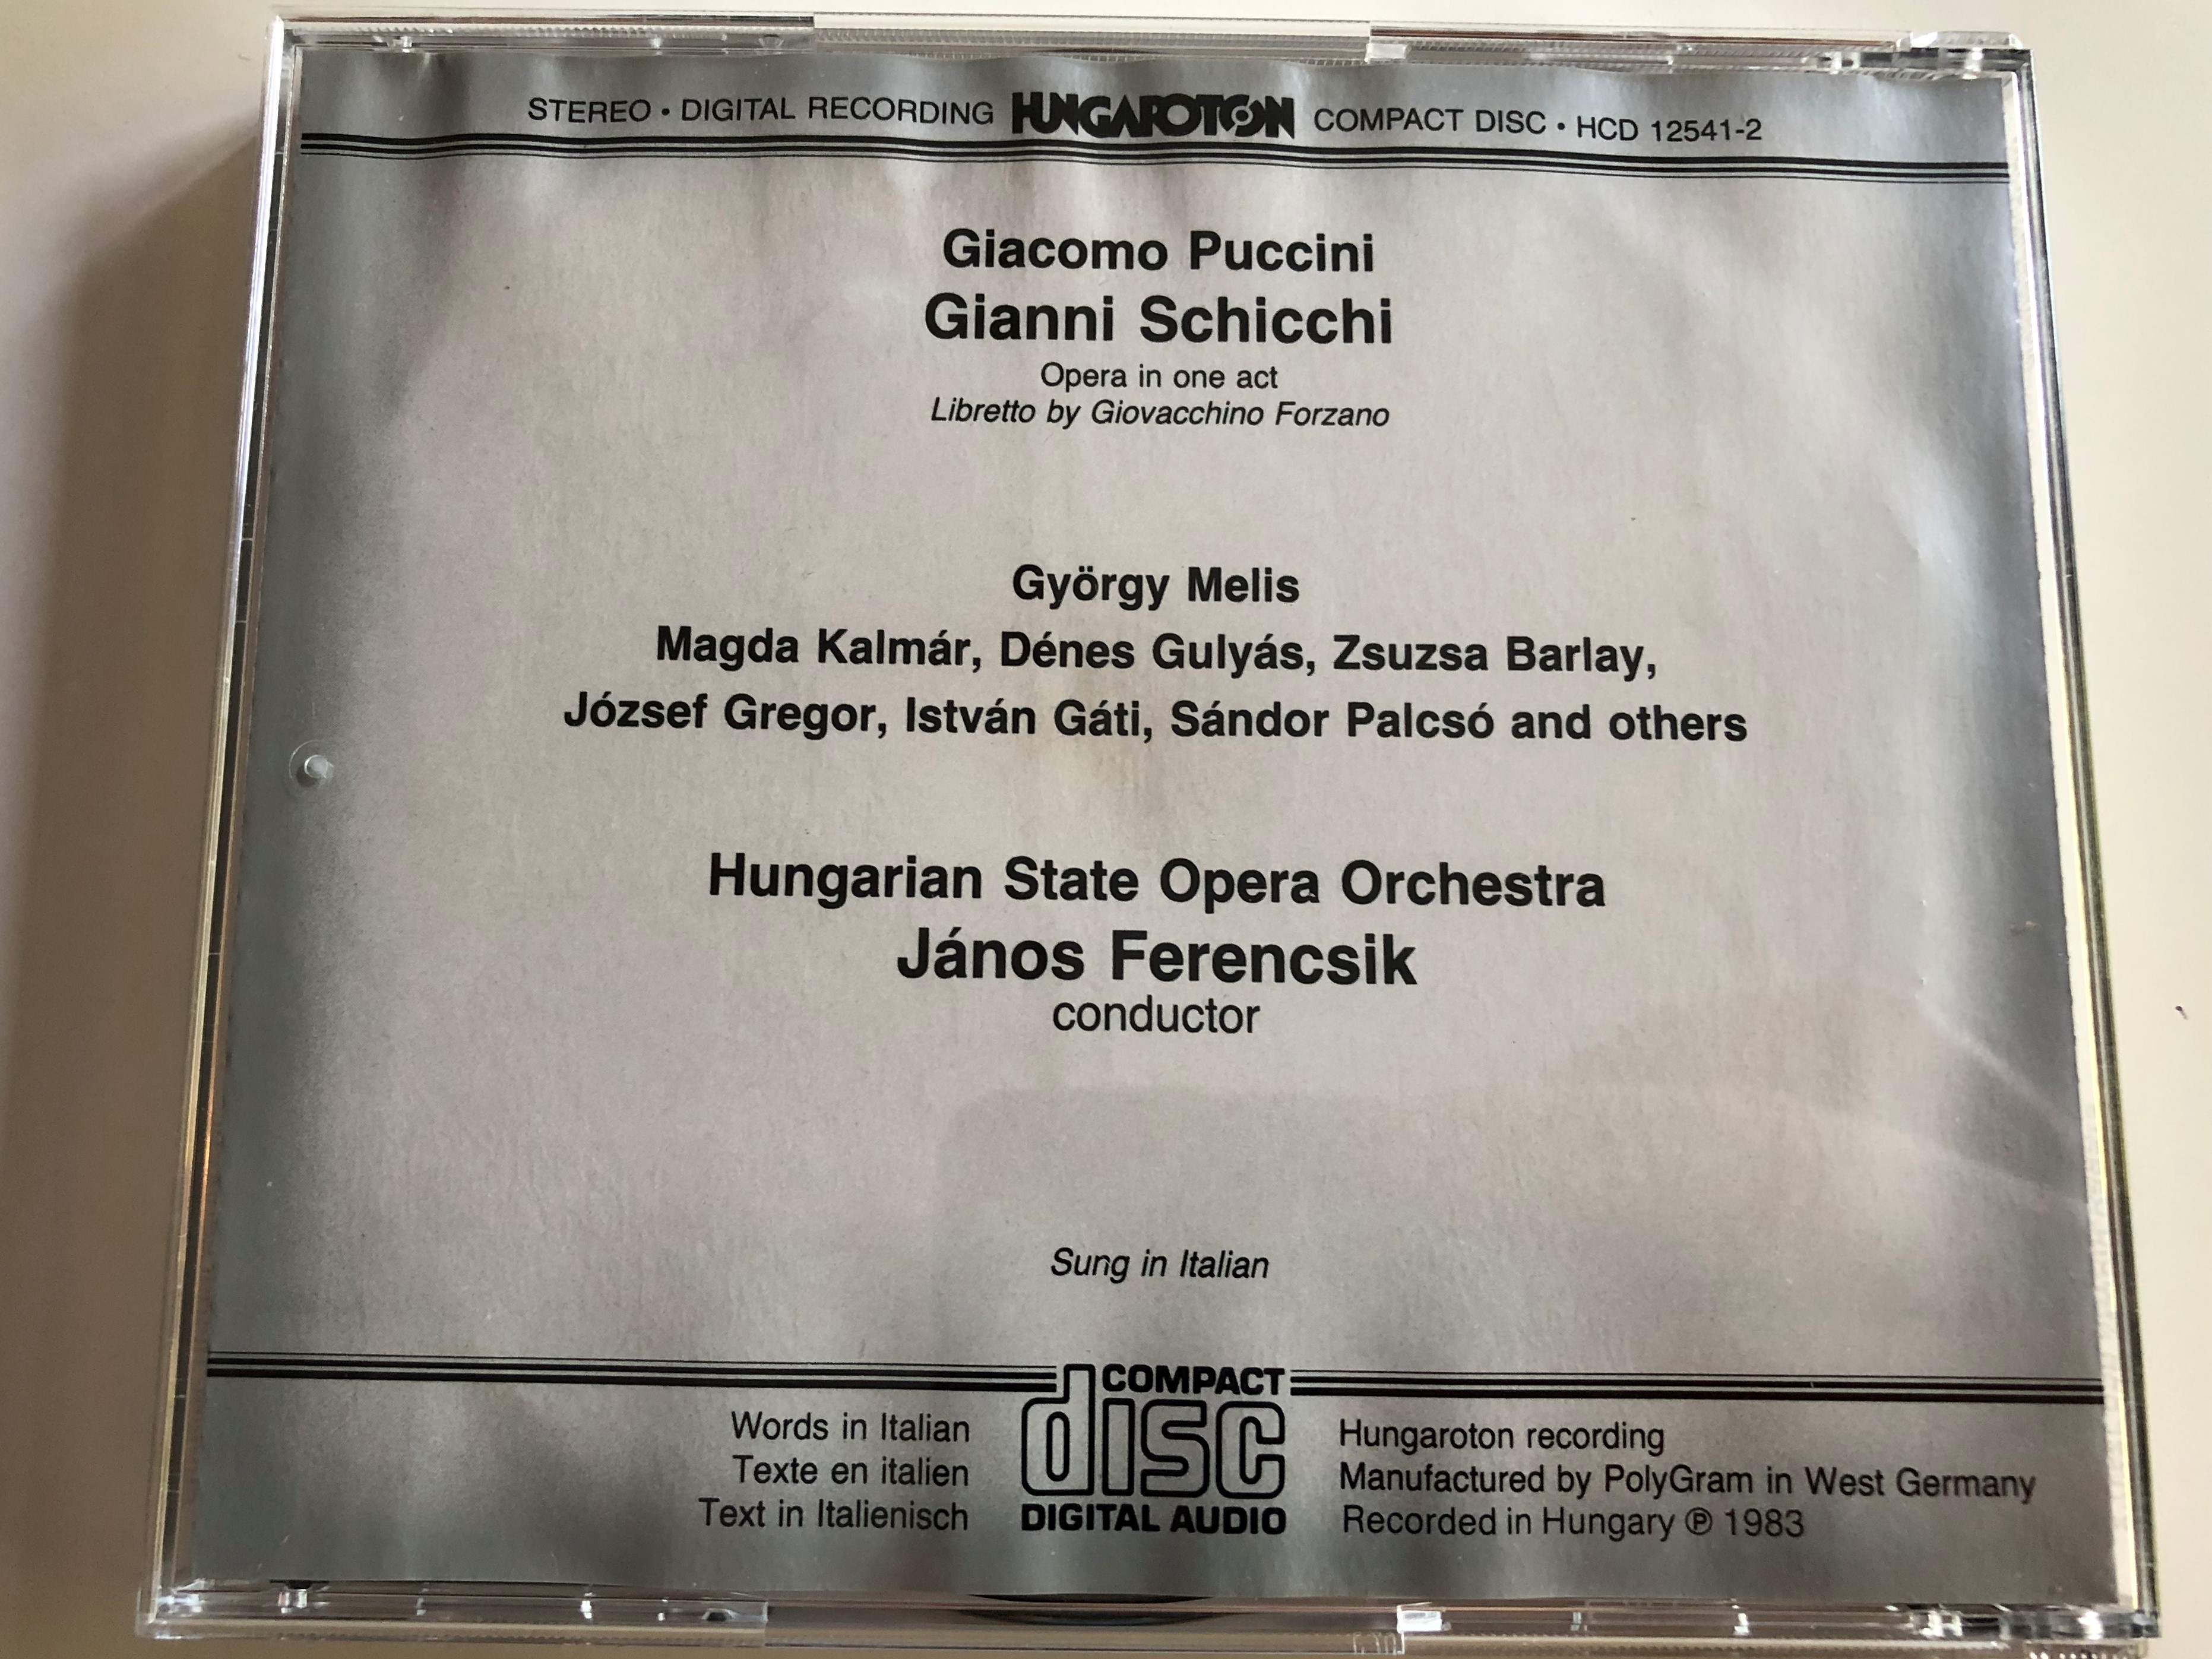 puccini-gianni-schicchi-magda-kalm-r-gy-rgy-melis-d-nes-guly-s-hungarian-state-opera-orchestra-conducted-by-j-nos-ferencsik-hungaroton-hcd-12541-2-7-.jpg